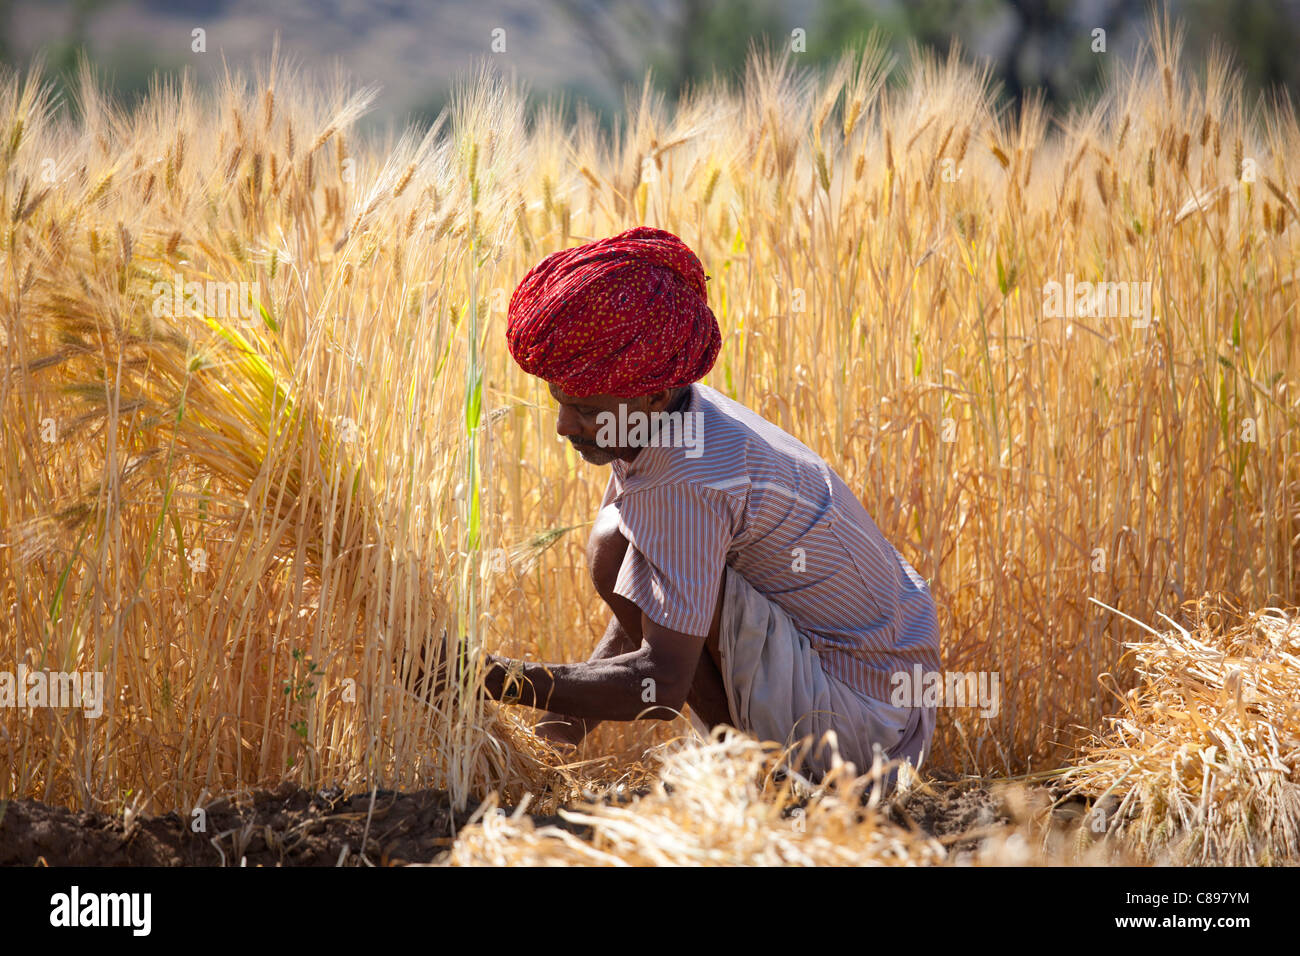 Barley crop being harvested by local agricultural workers in fields at Nimaj, Rajasthan, Northern India Stock Photo